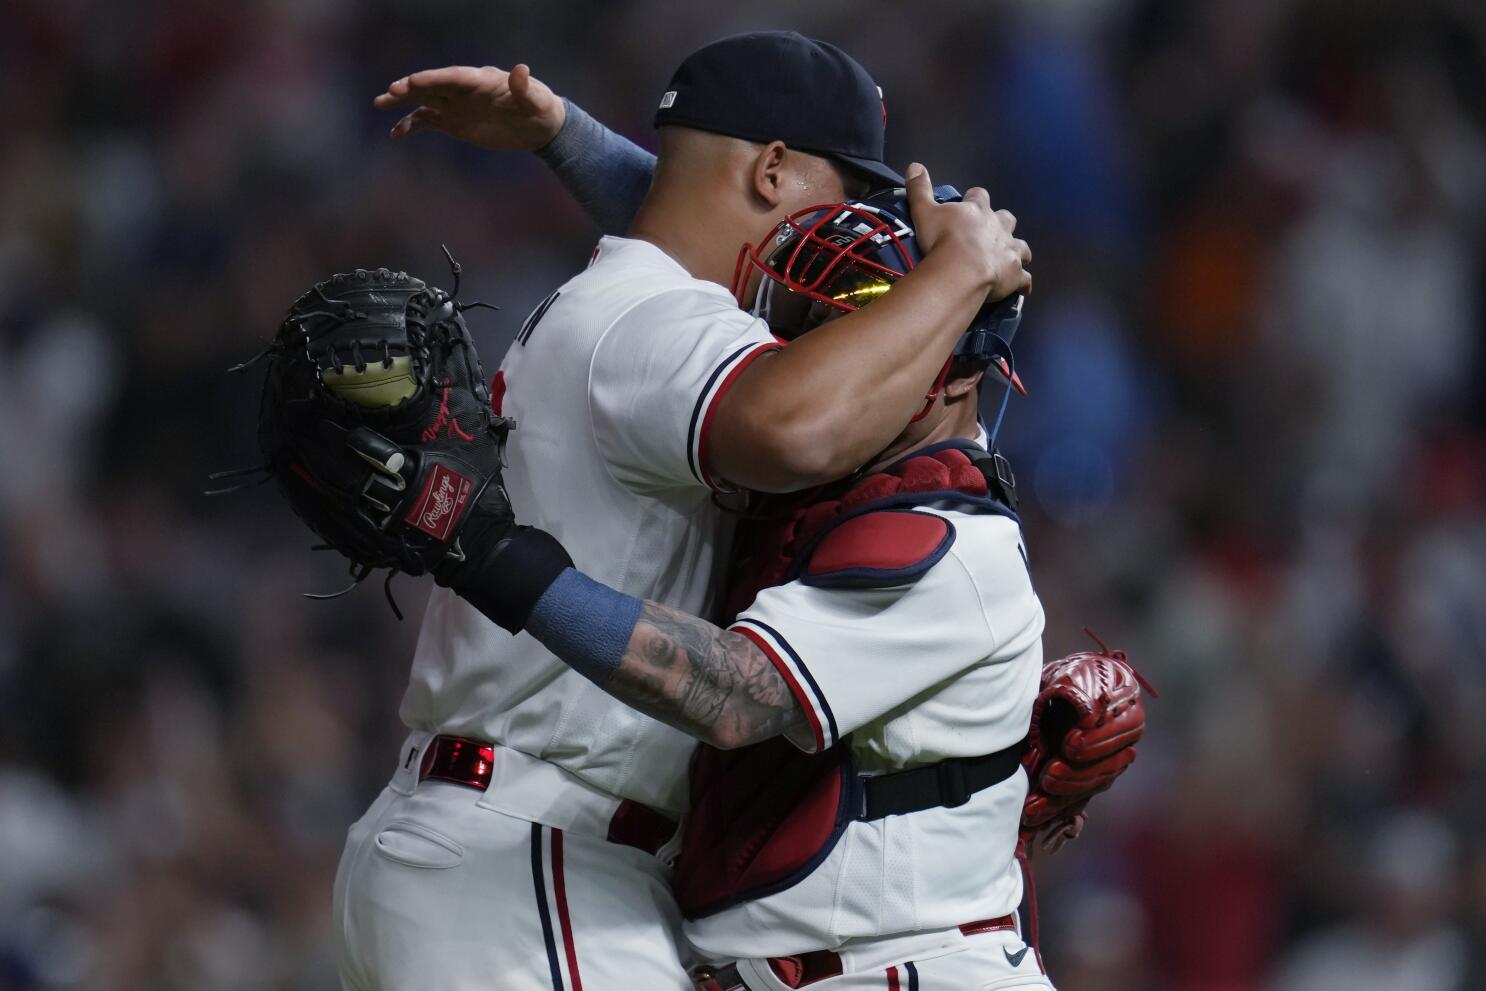 What Can We Learn From the Playoff Catchers? - Twins - Twins Daily